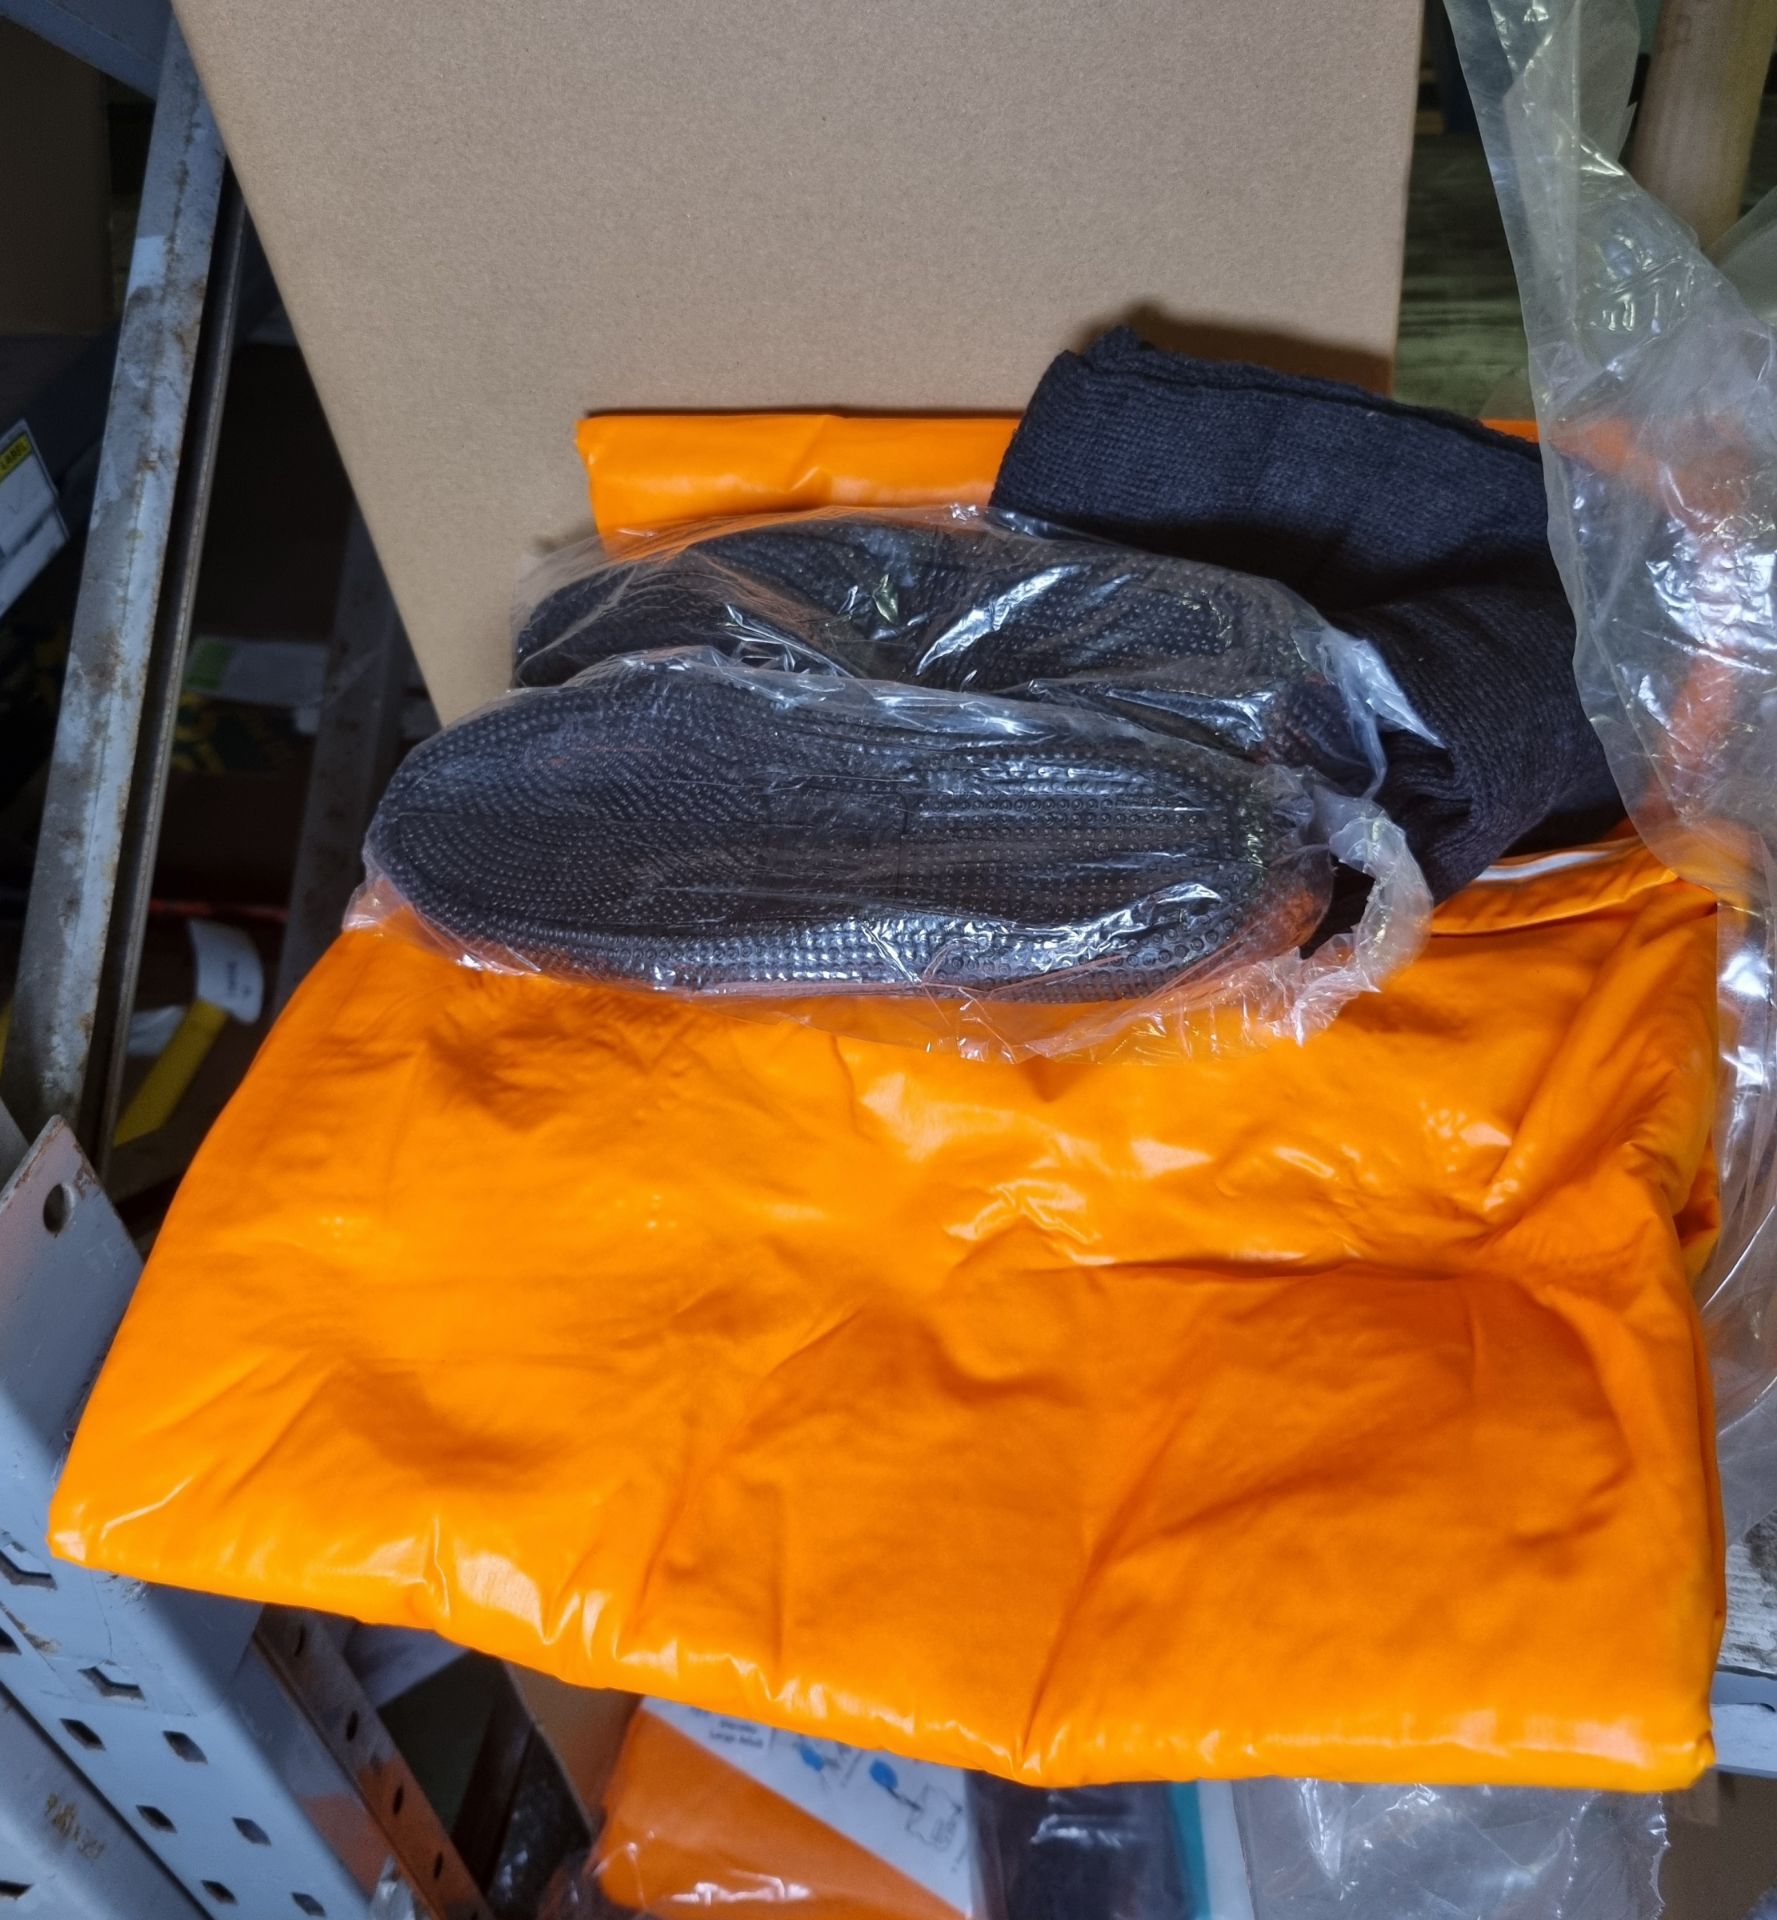 15x Contamination/disrobe kit. Size - Junior. New and unused, but kit is incomplete - cape, shoes an - Image 4 of 4